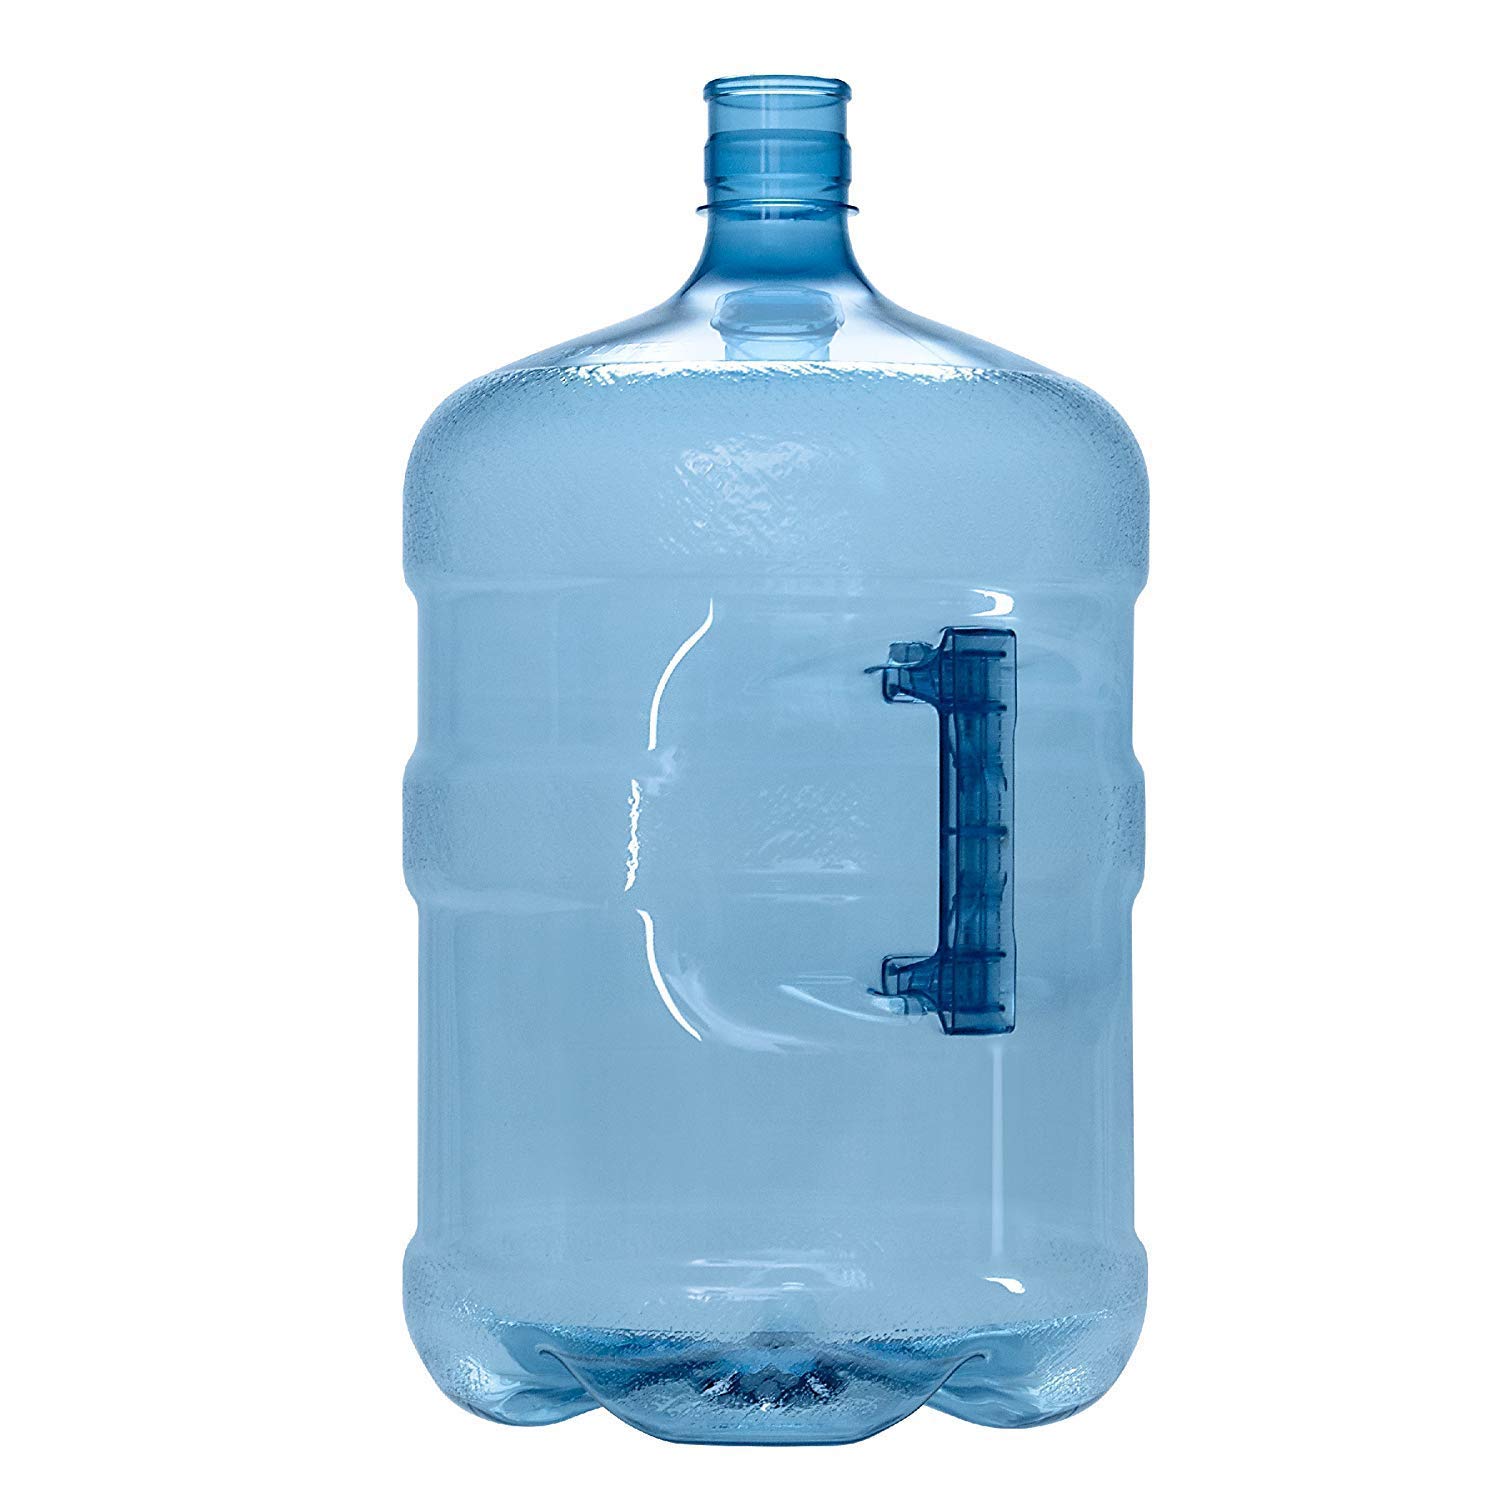 Refundable Bottle Deposit - 18.9 litre - Simply Pure Water